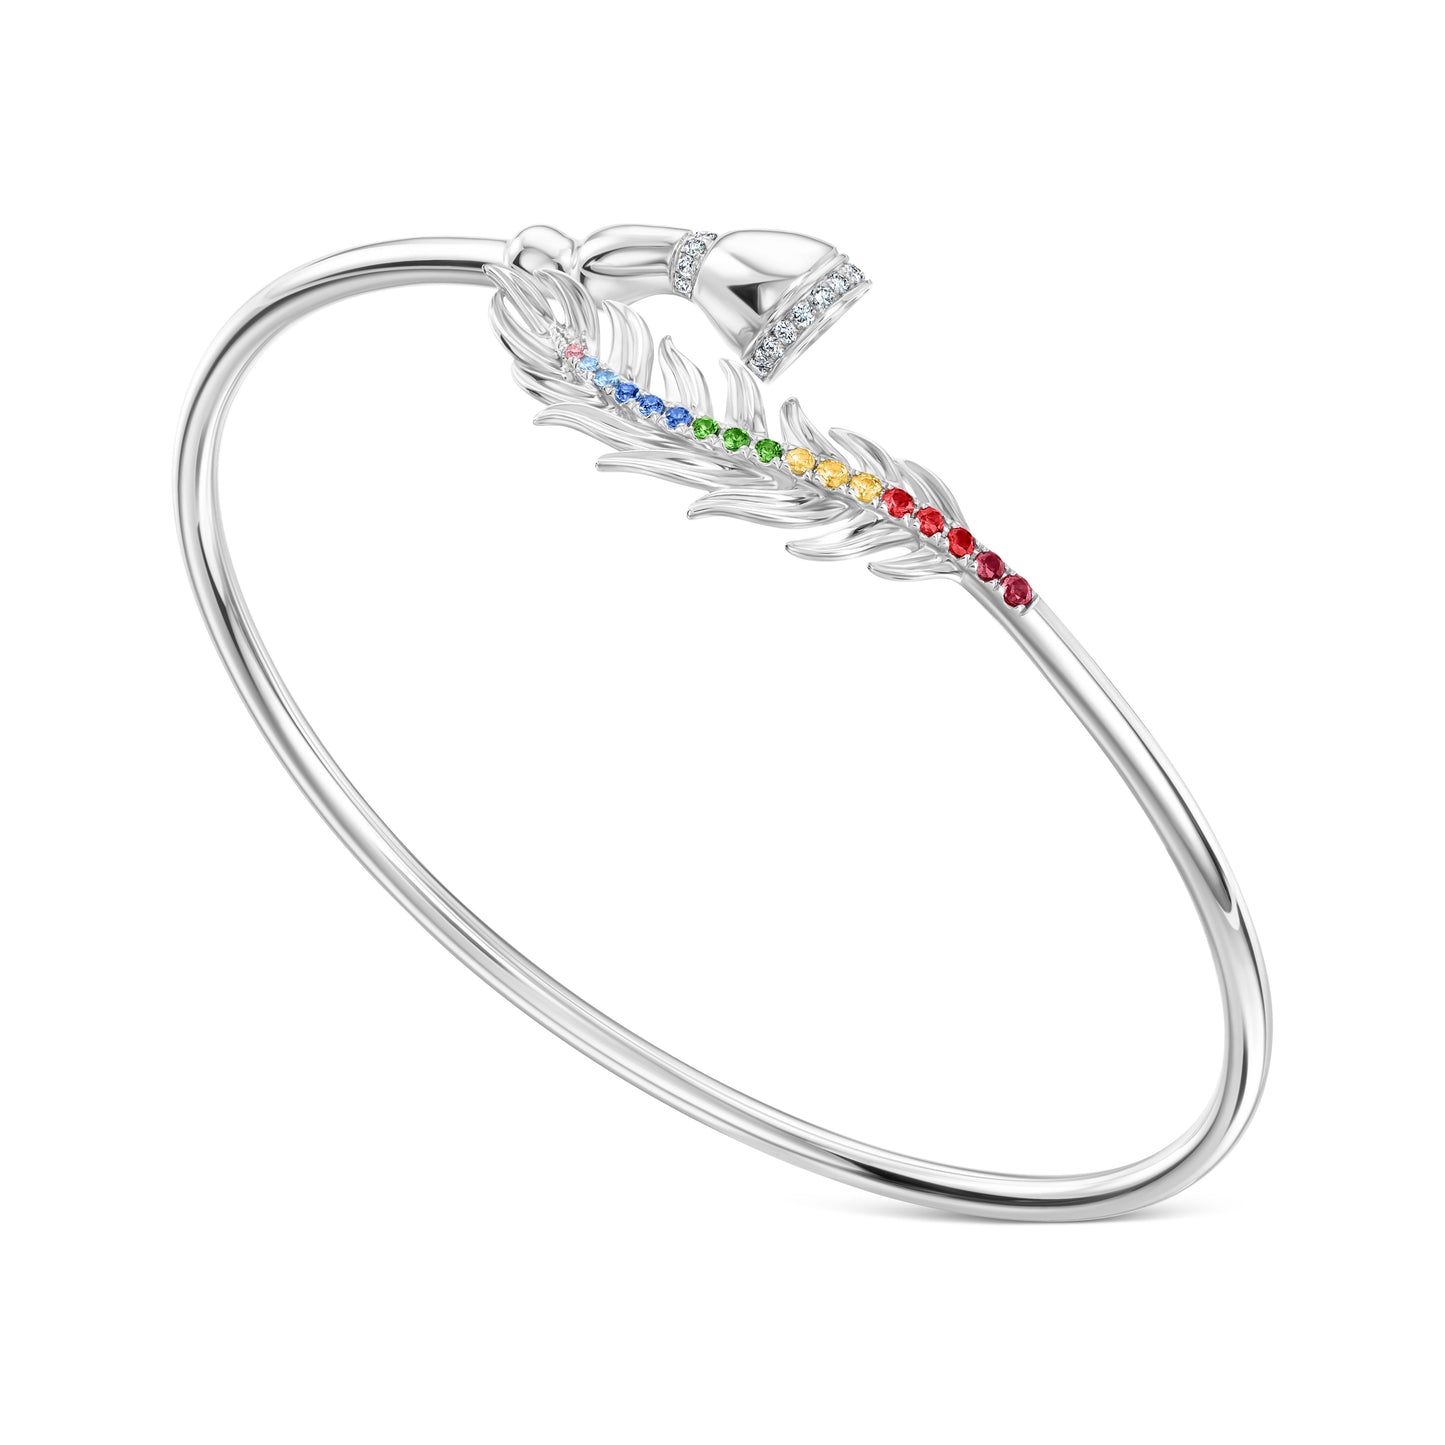 Fearless Feathers White Gold and Multicolor Sapphire Bracelet